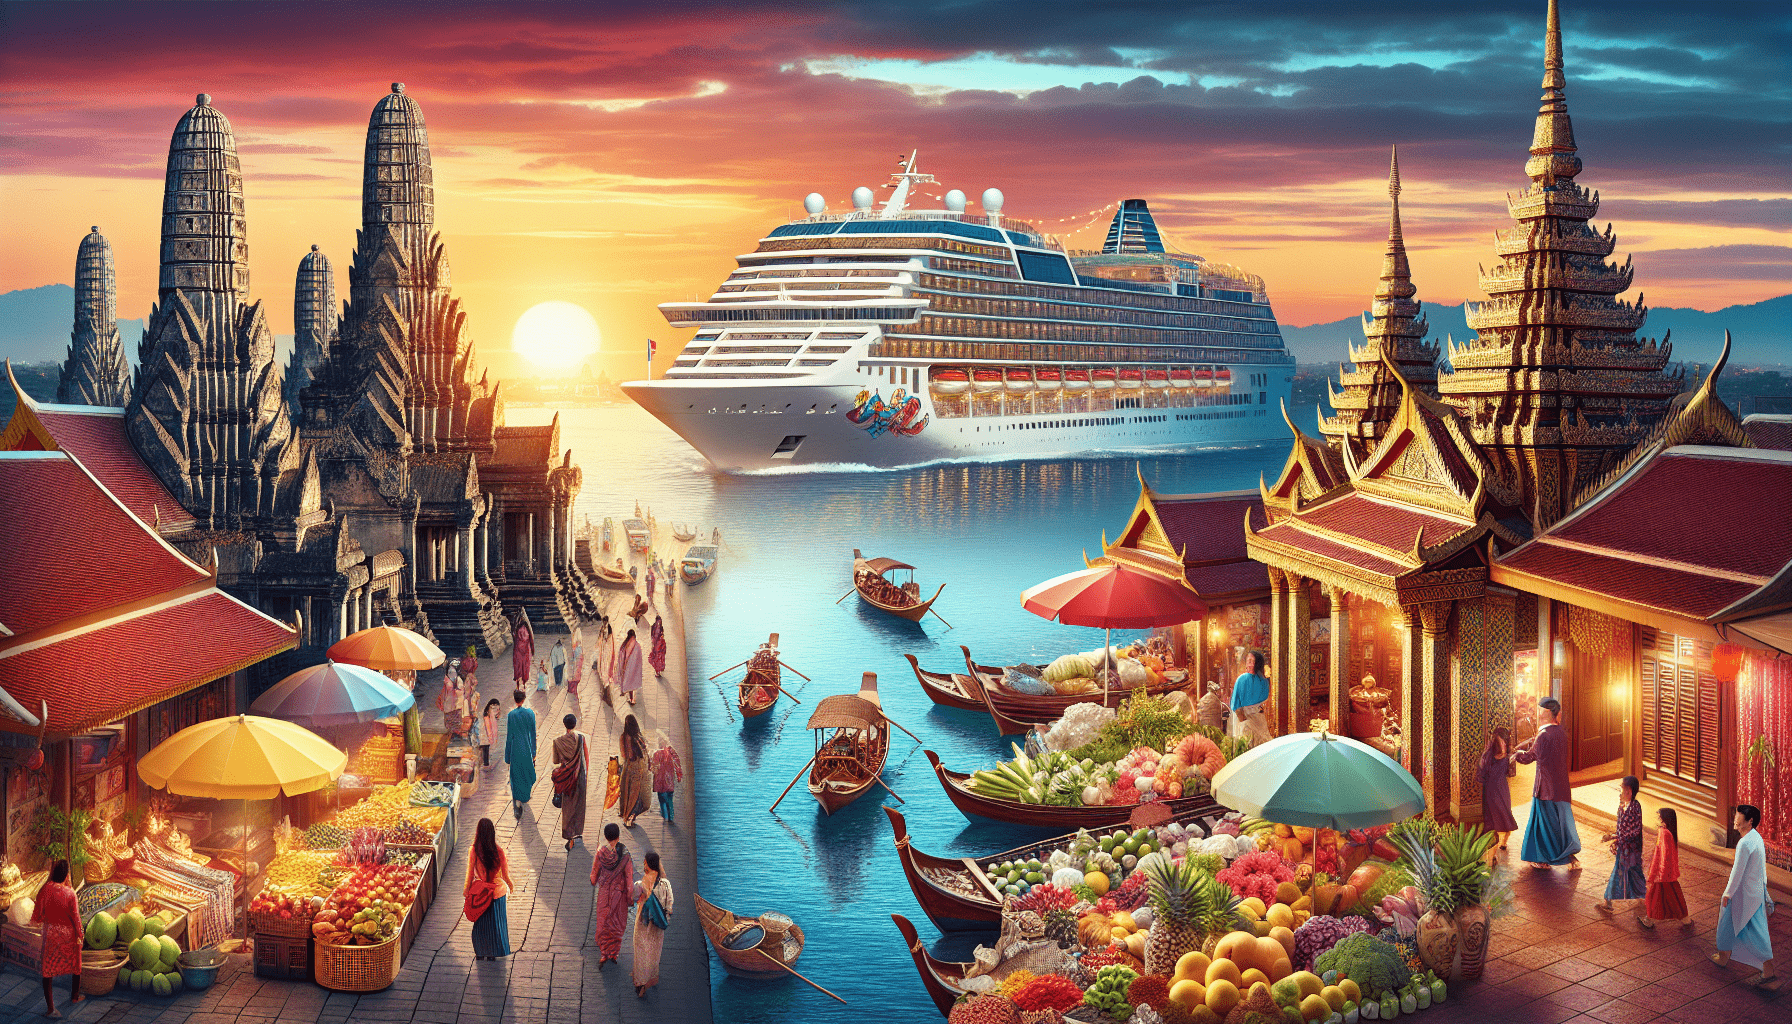 Which Cruise Line Is Best For Asia?